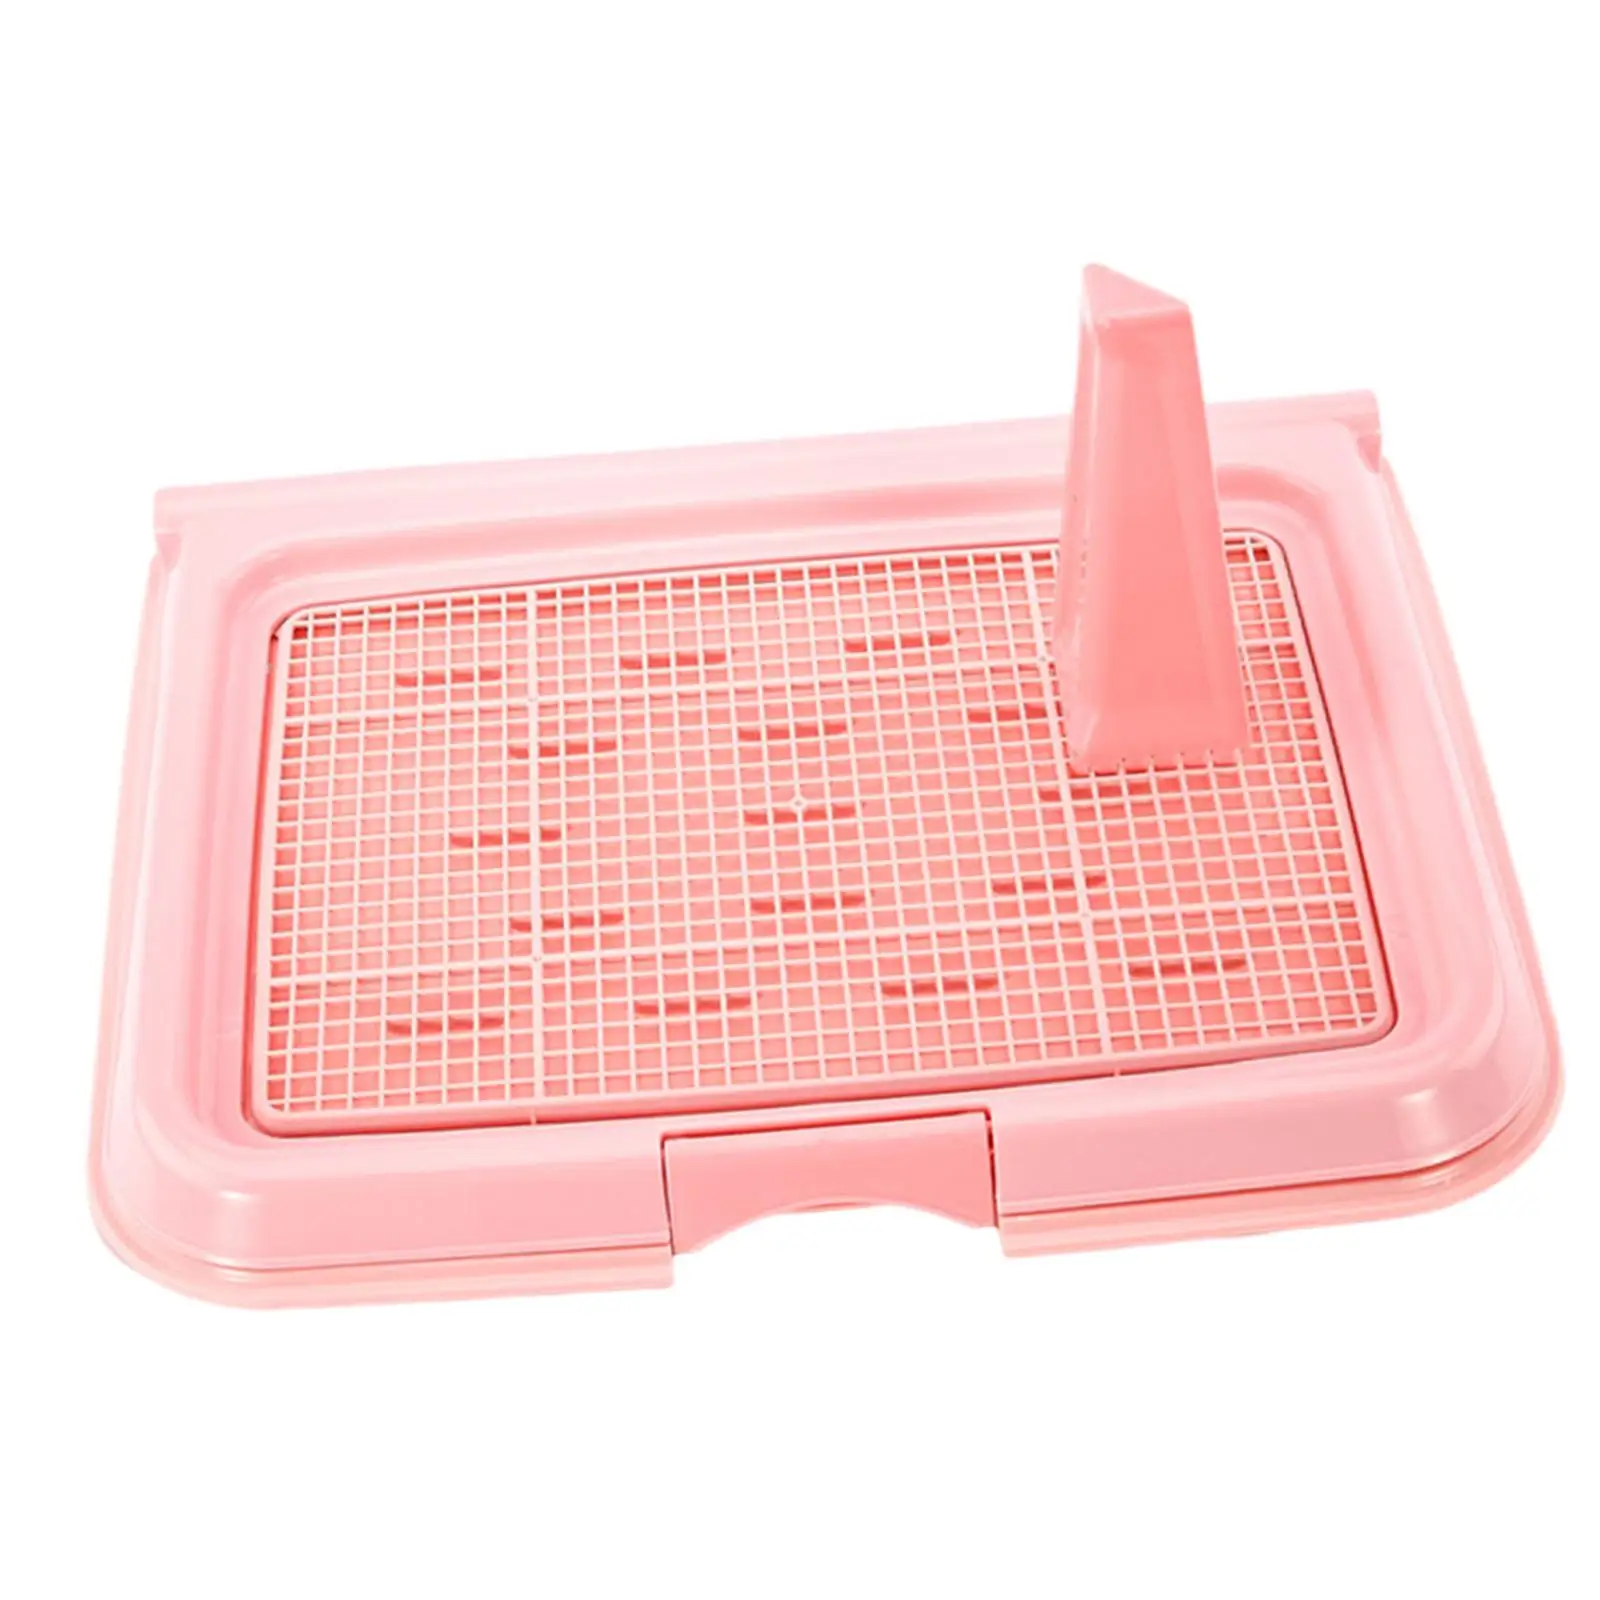 Dogs Toilet Training Potty Tray Anti Skid Bunny Other Pets Bedpan Puppy Training Pads Holder Indoor Outdoor Dog Potty Tray